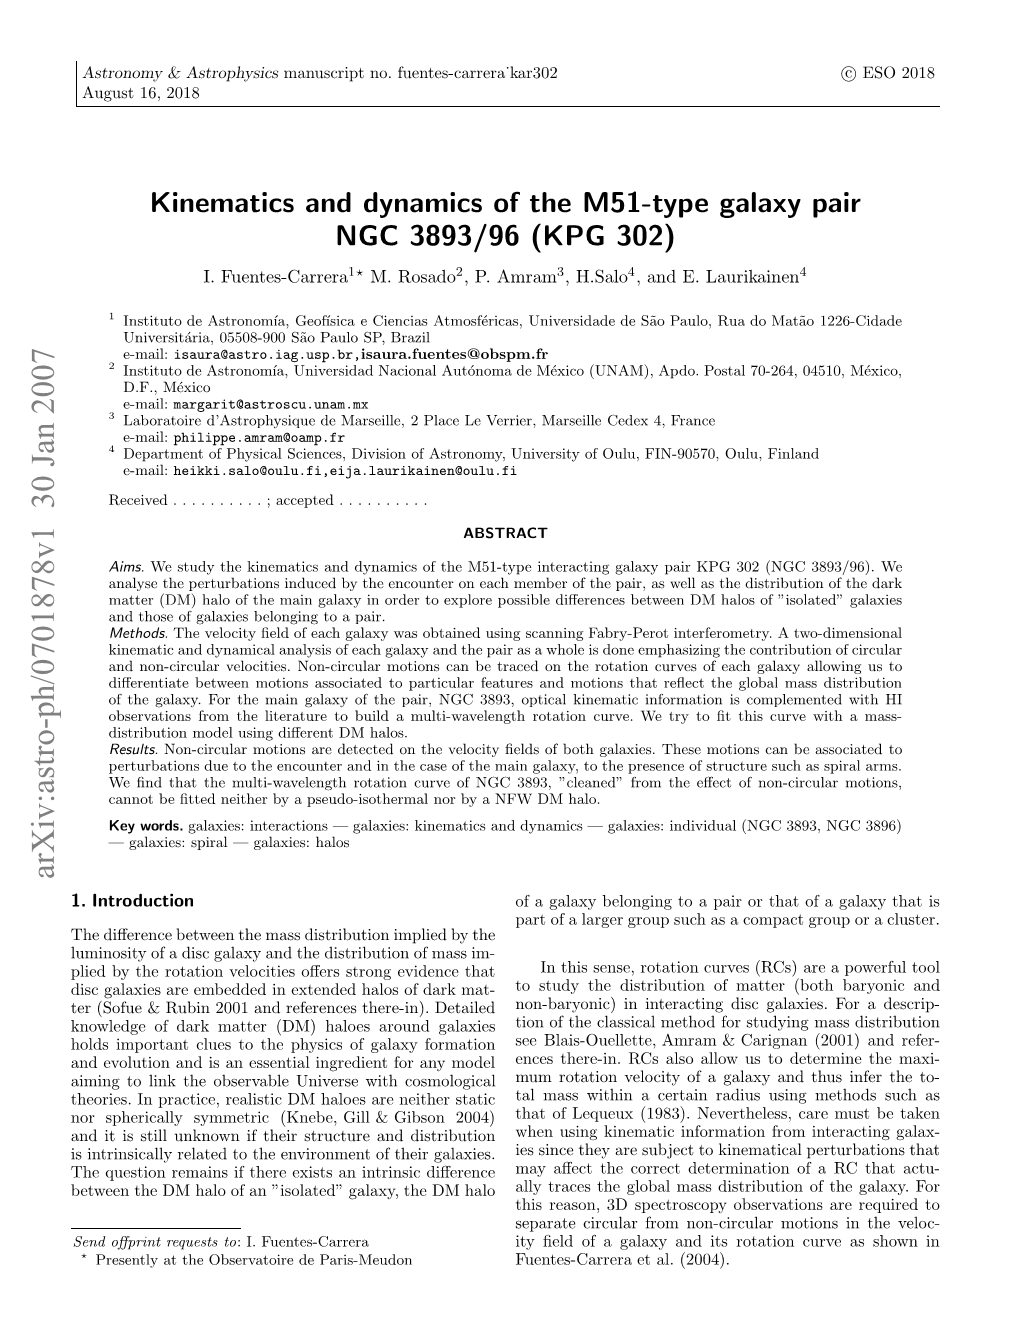 Kinematics and Dynamics of the M51-Type Galaxy Pair NGC 3893/96